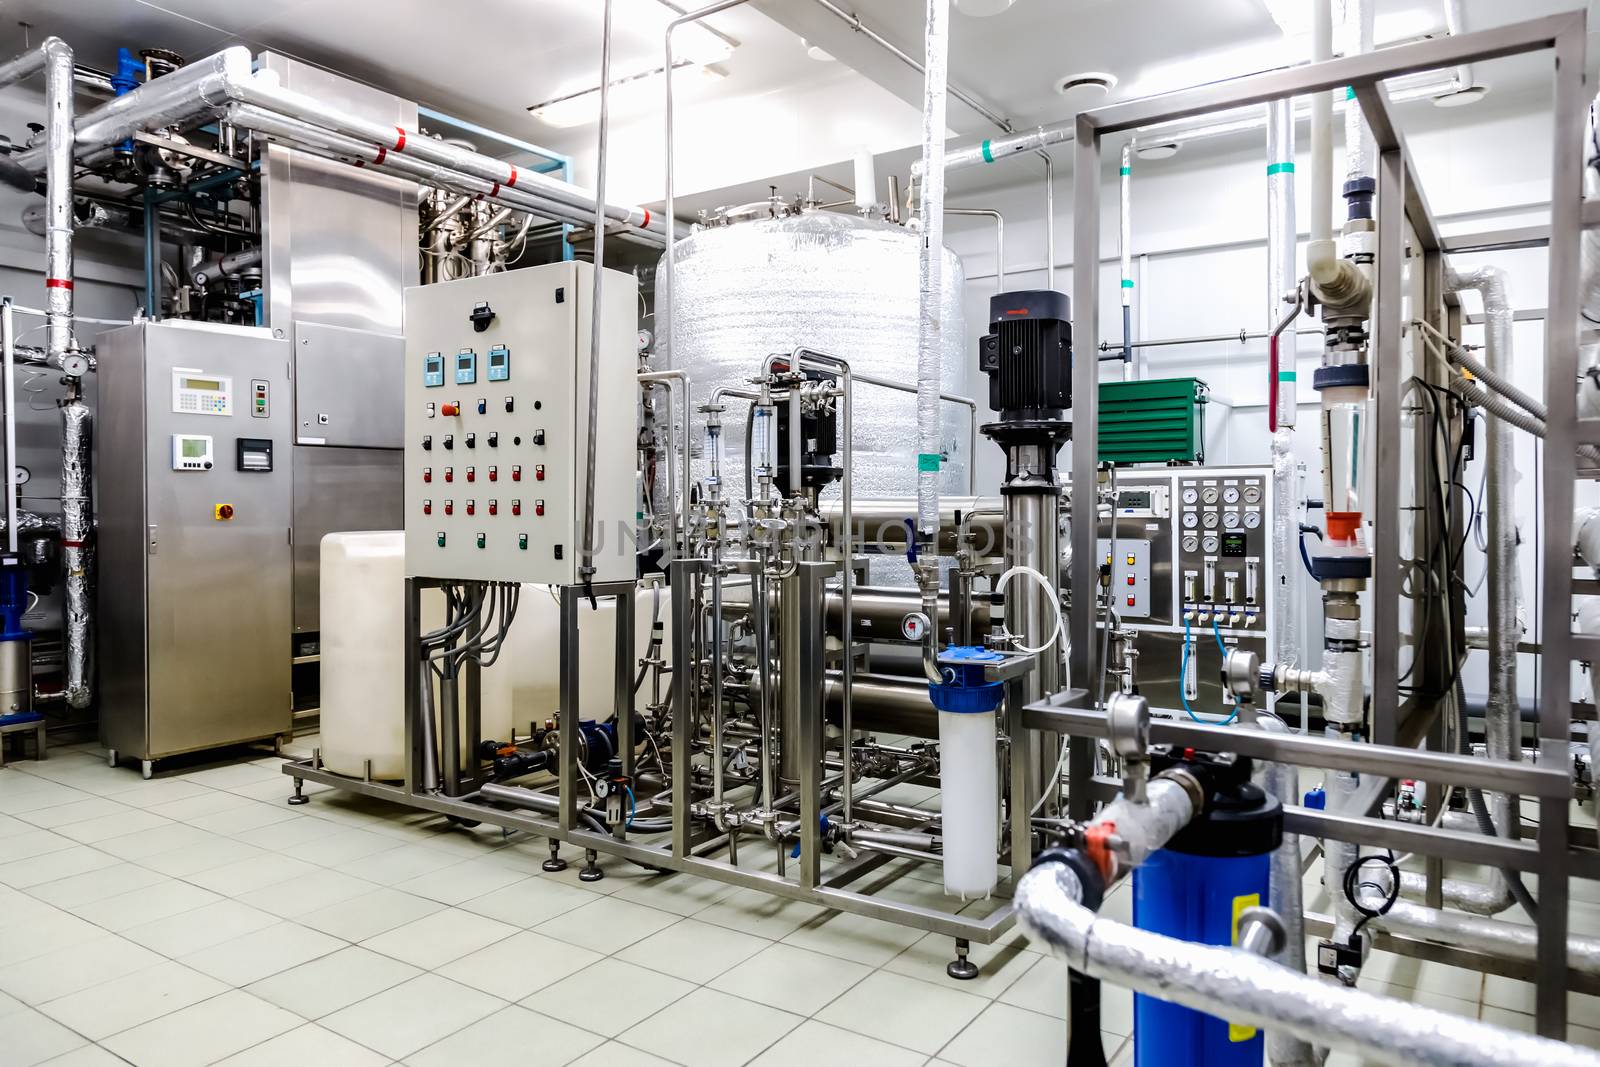 Water conditioning room and control way equipment on pharmaceutical industry or chemical plant